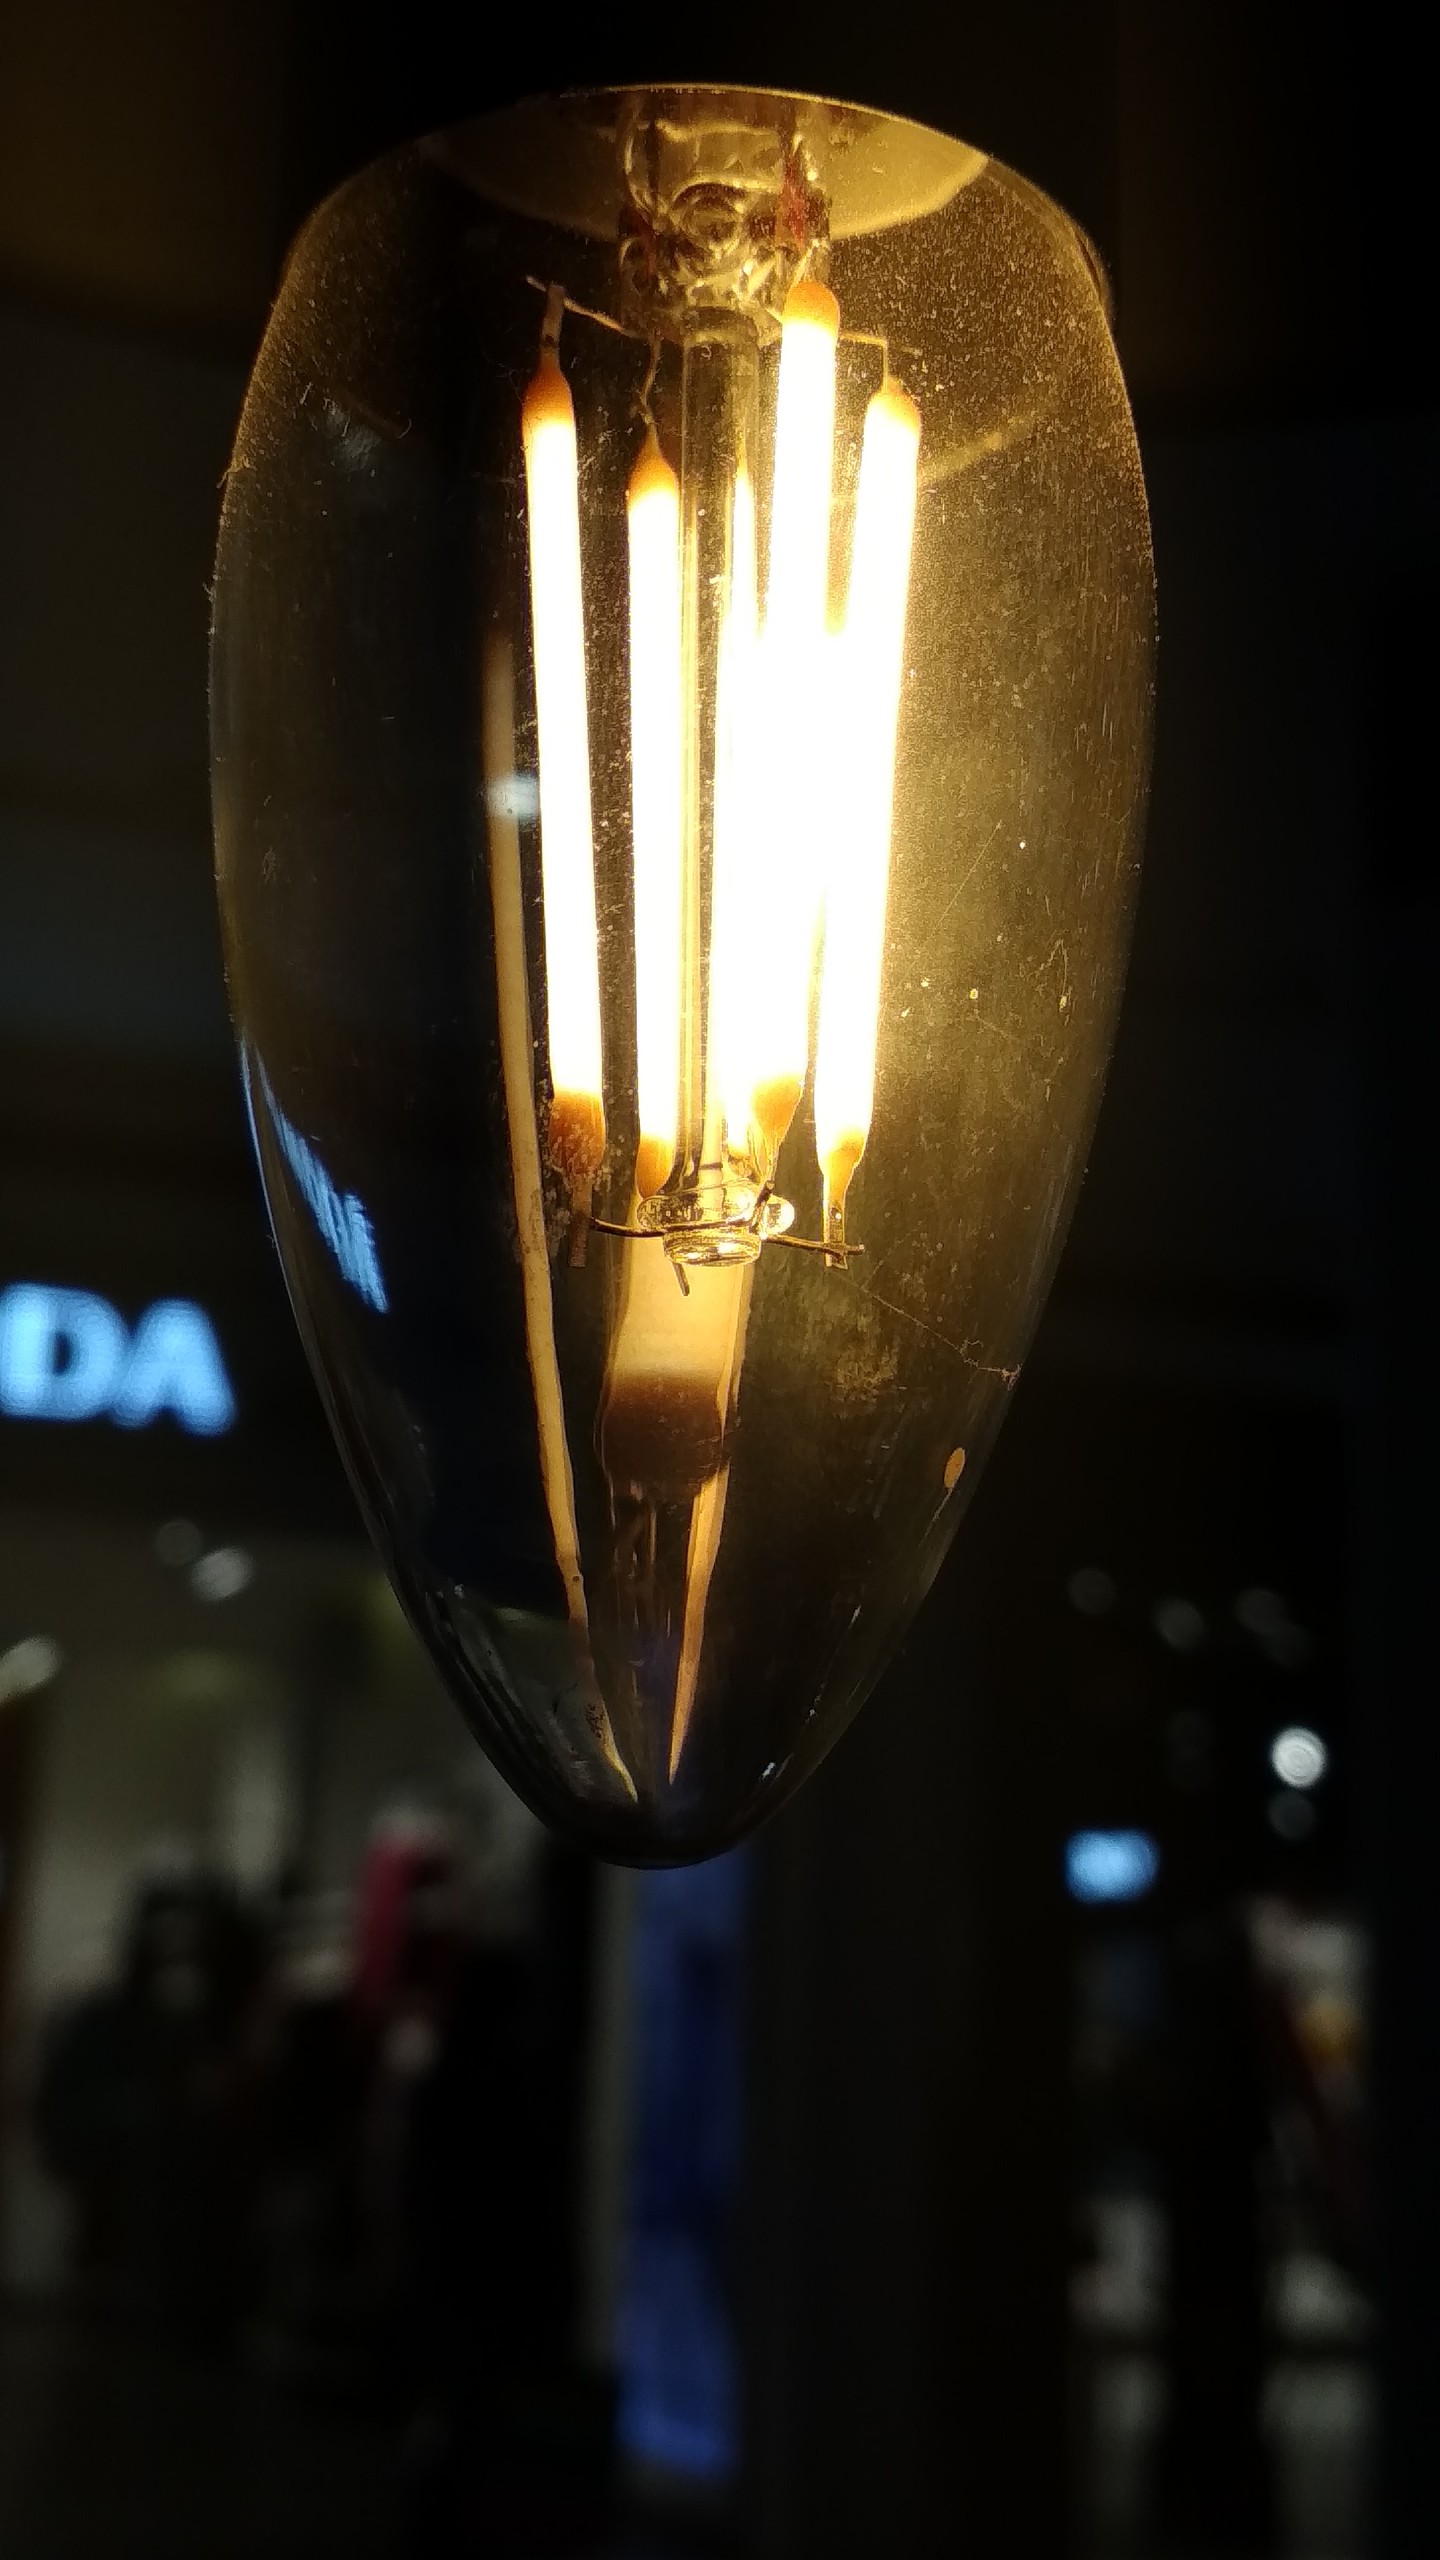 A light bulb in the night.